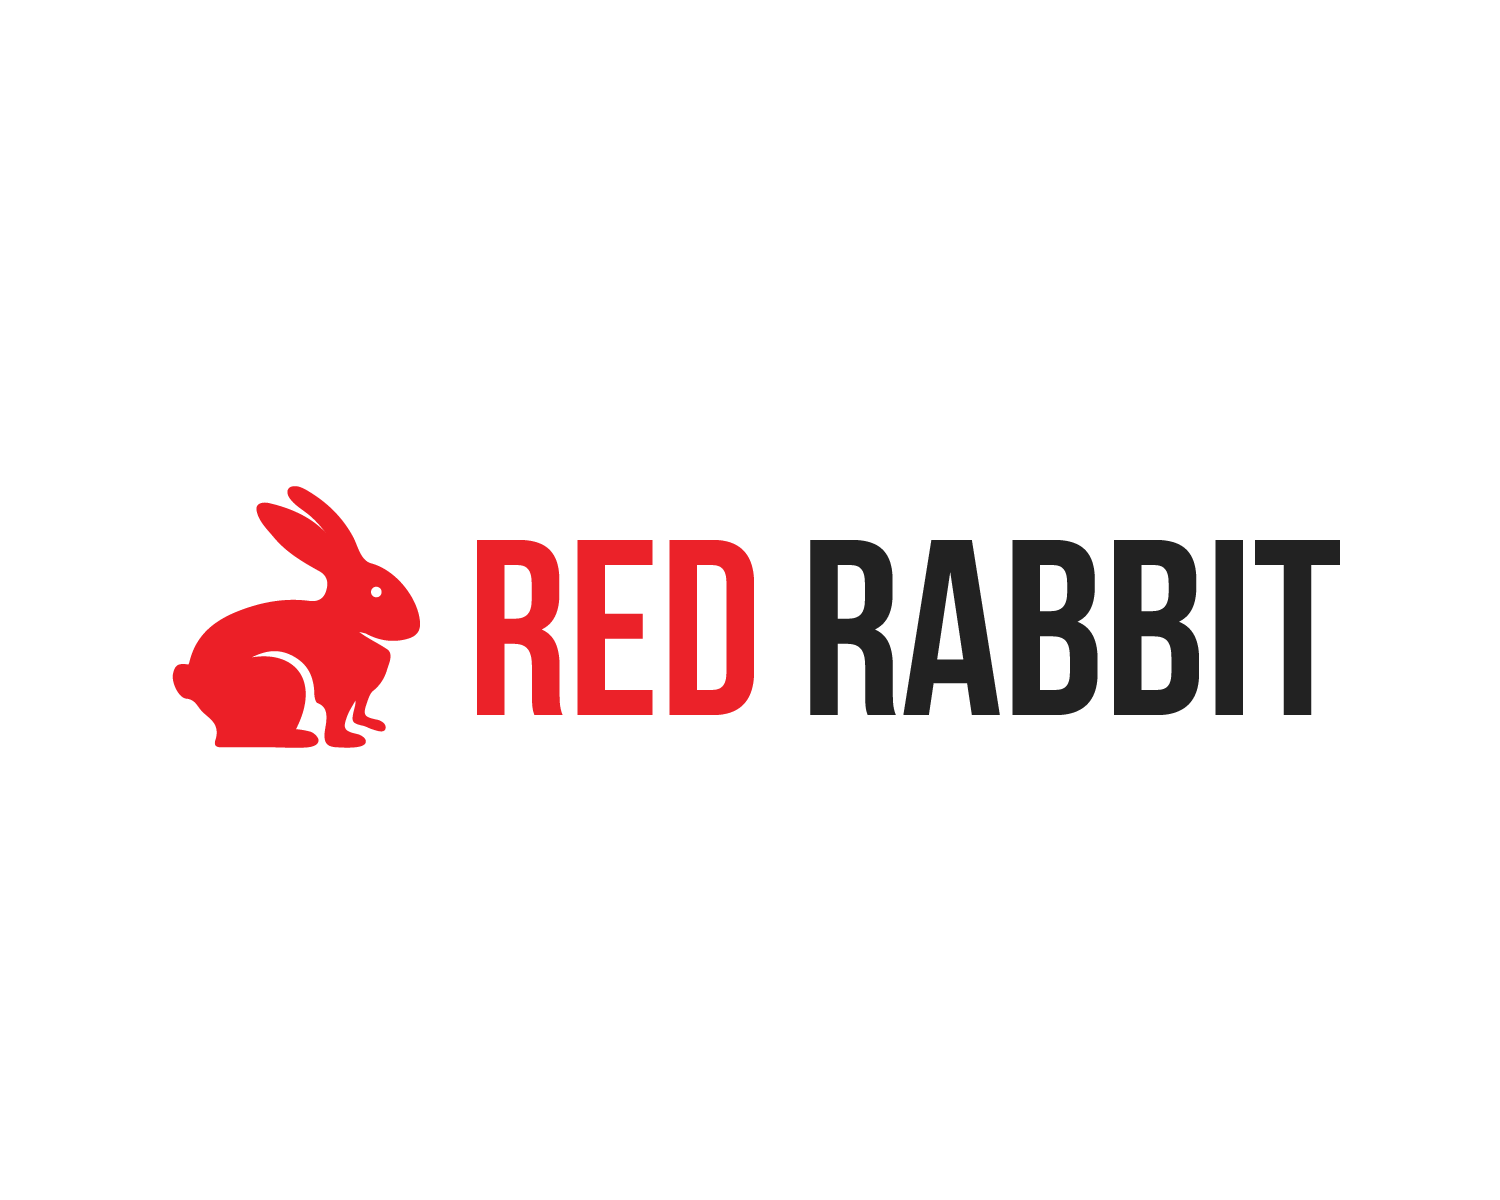 Colorful Rabbit Logo - Modern, Colorful, Coffee Shop Logo Design for RED RABBIT CAFE